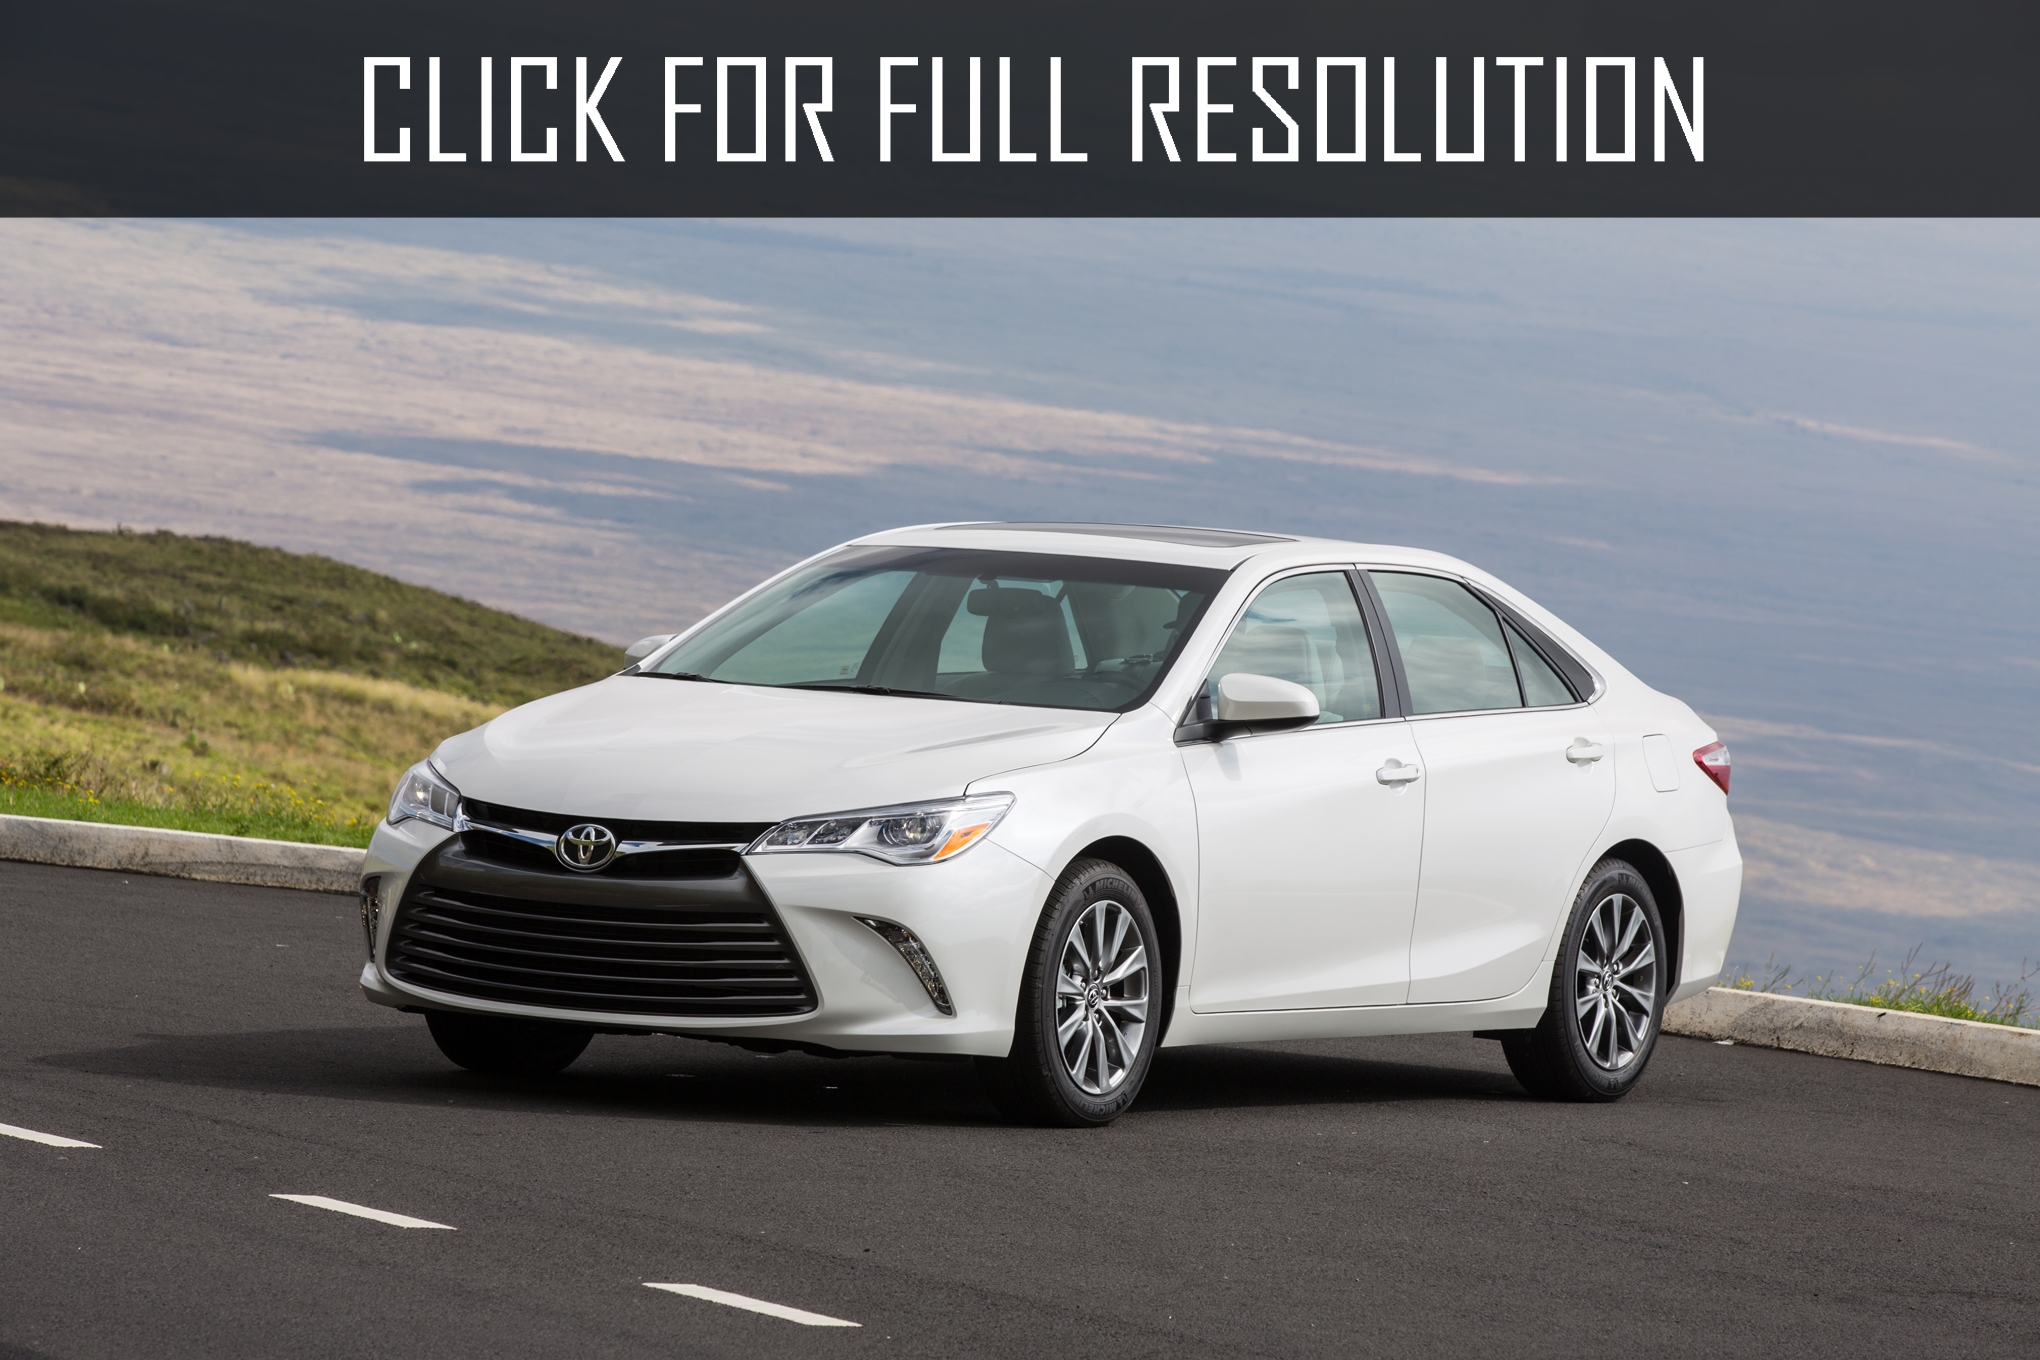 2015 Toyota Camry Xle Best Image Gallery 8 17 Share And Download